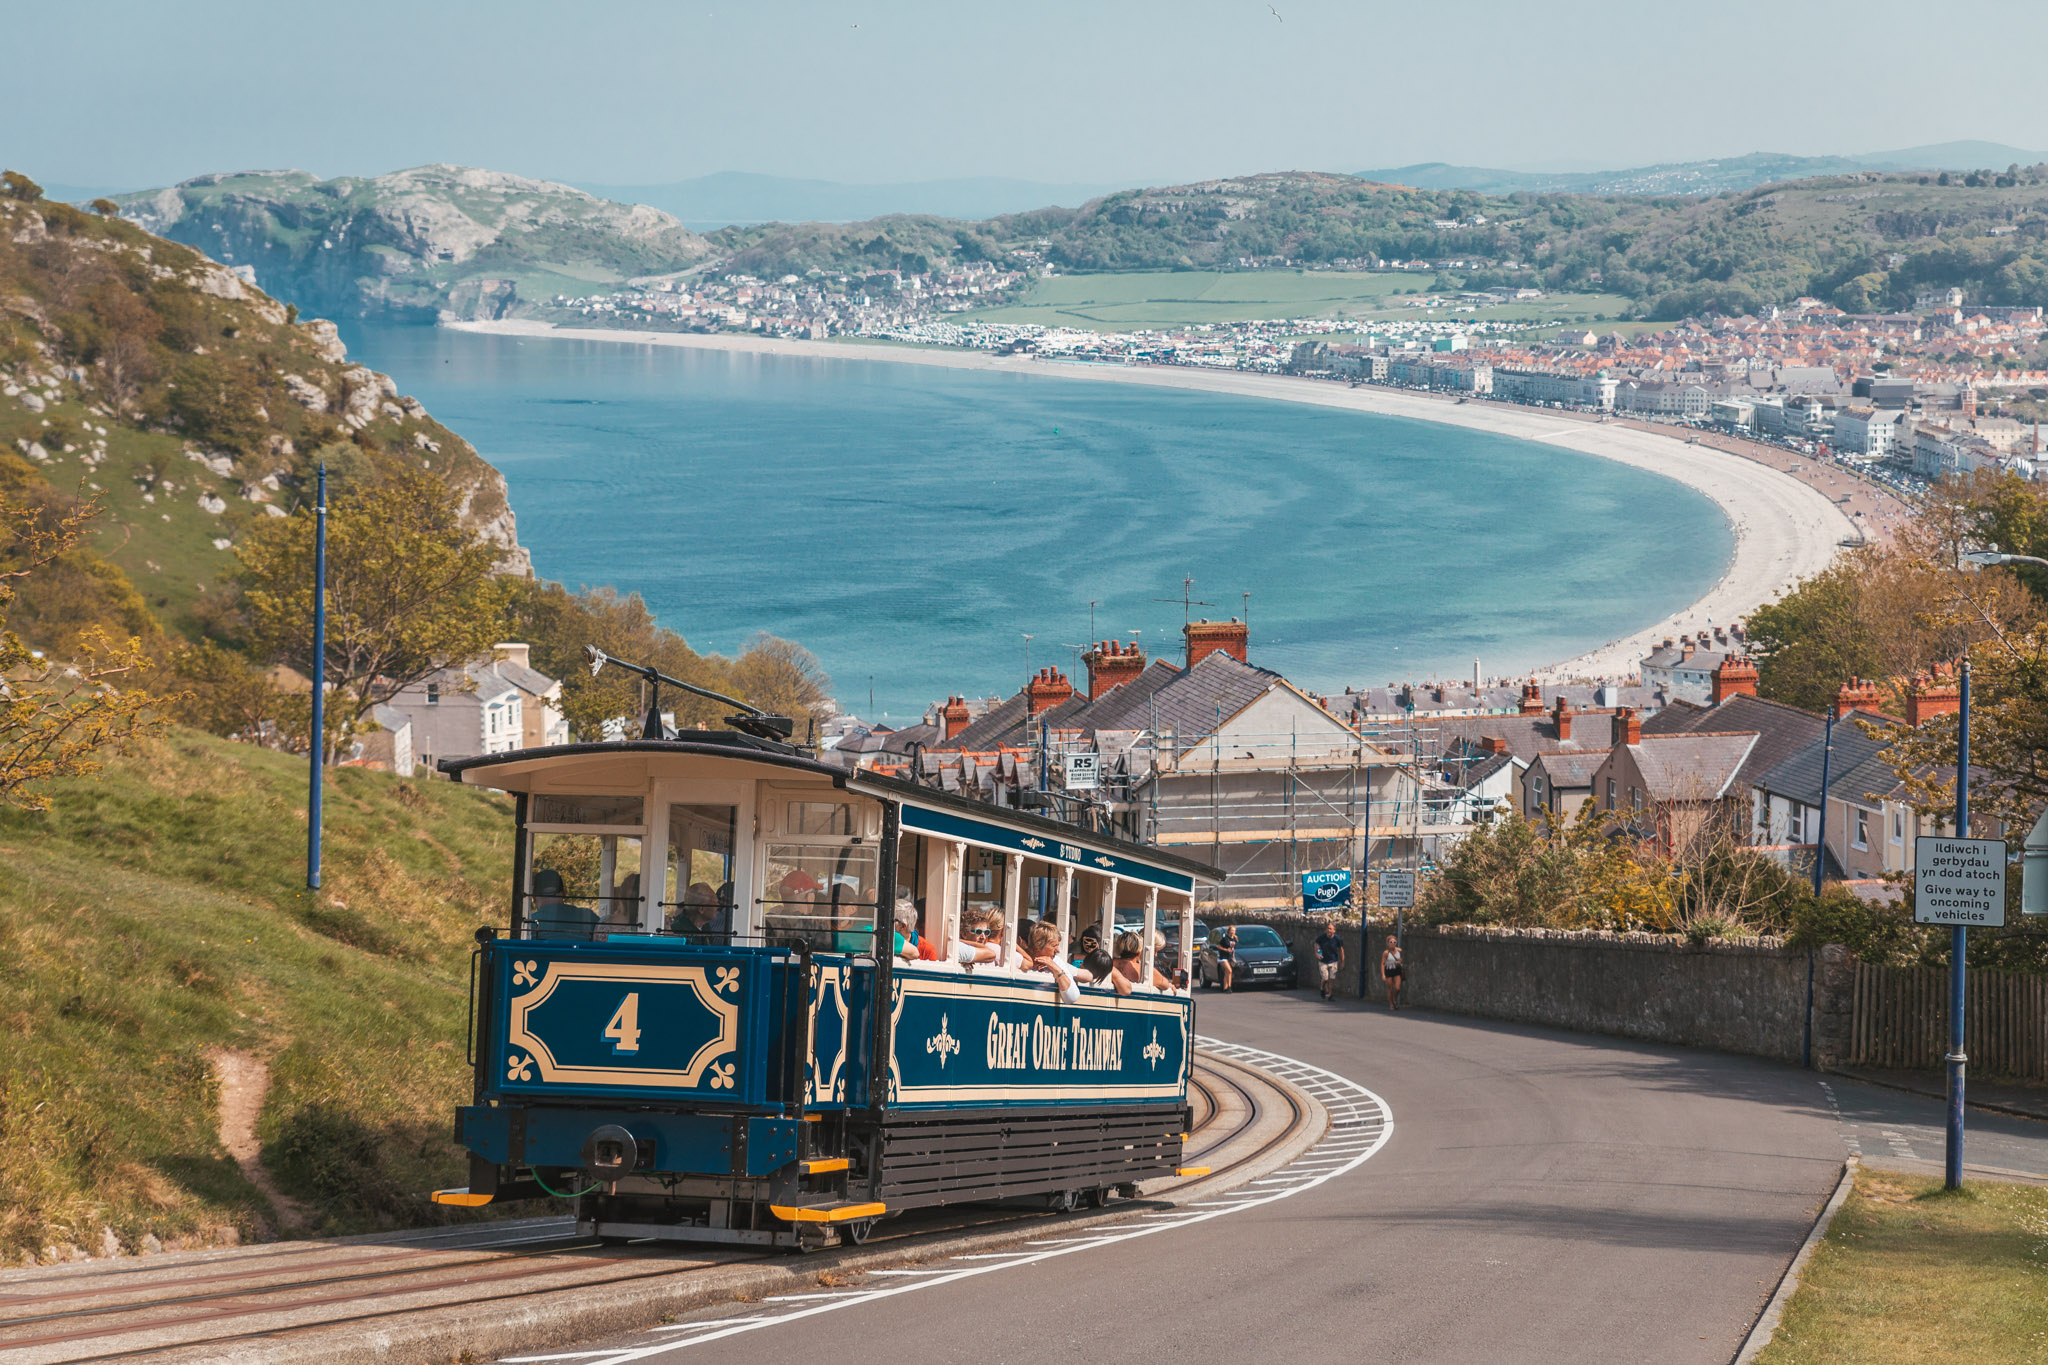 Llandudno Great Orme Tramway // The Most Beautiful Places to Visit in Wales // #readysetjetset #wales #uk #welsh #travel #photospots #blogpost